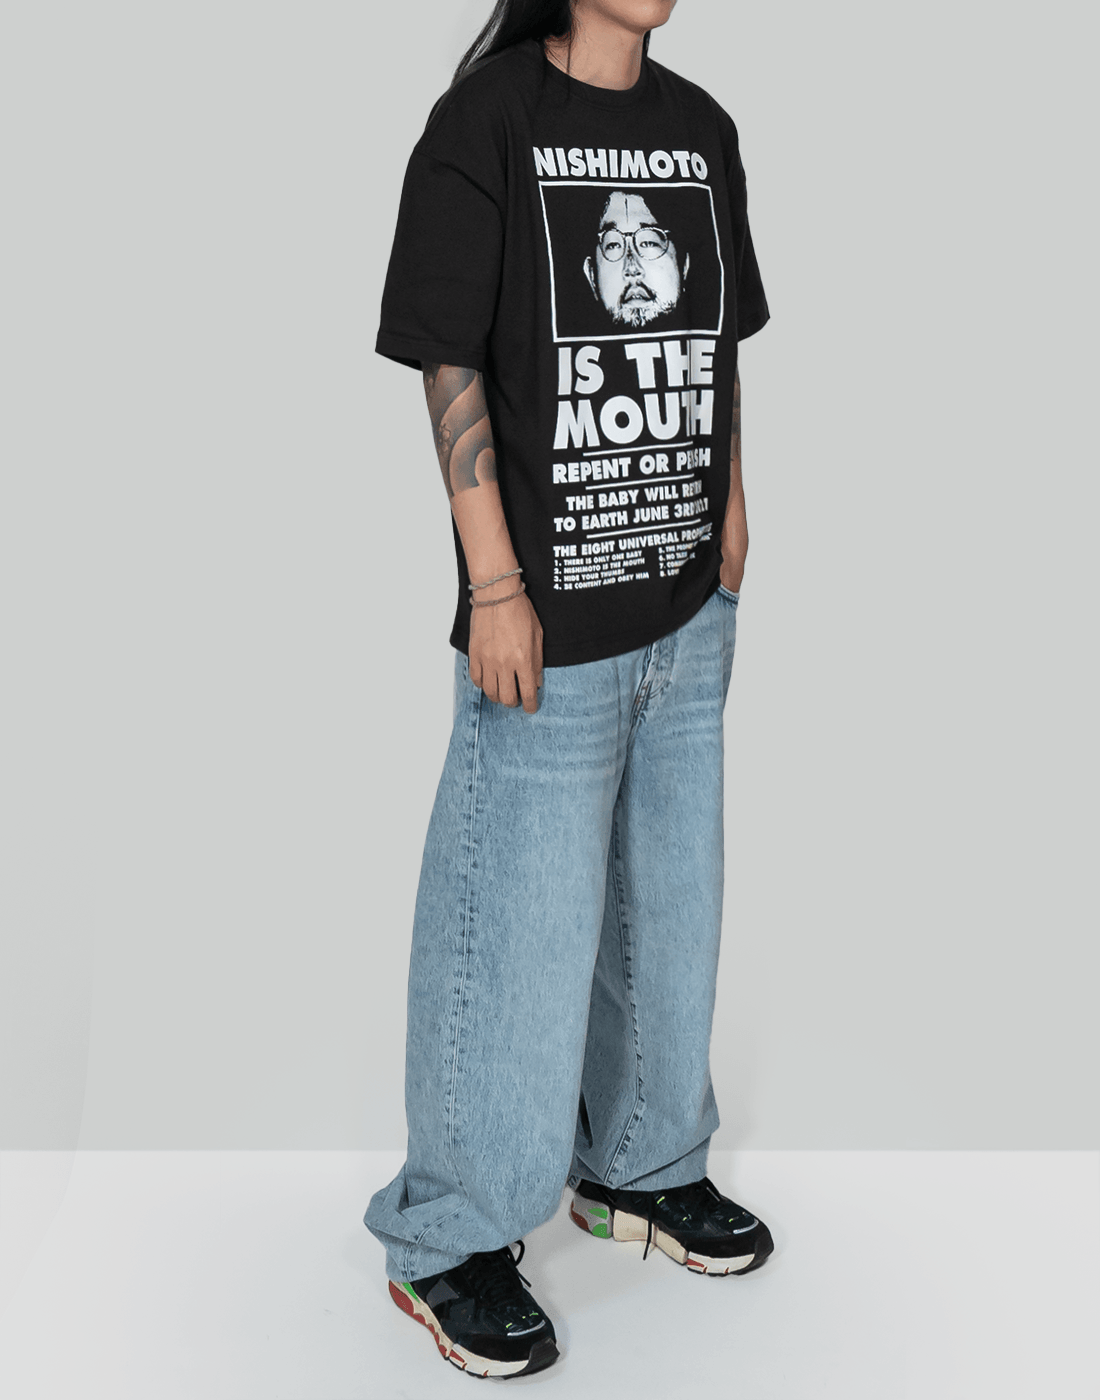 NISHIMOTO IS THE MOUTH CLASSIC S/S TEE – 082plus